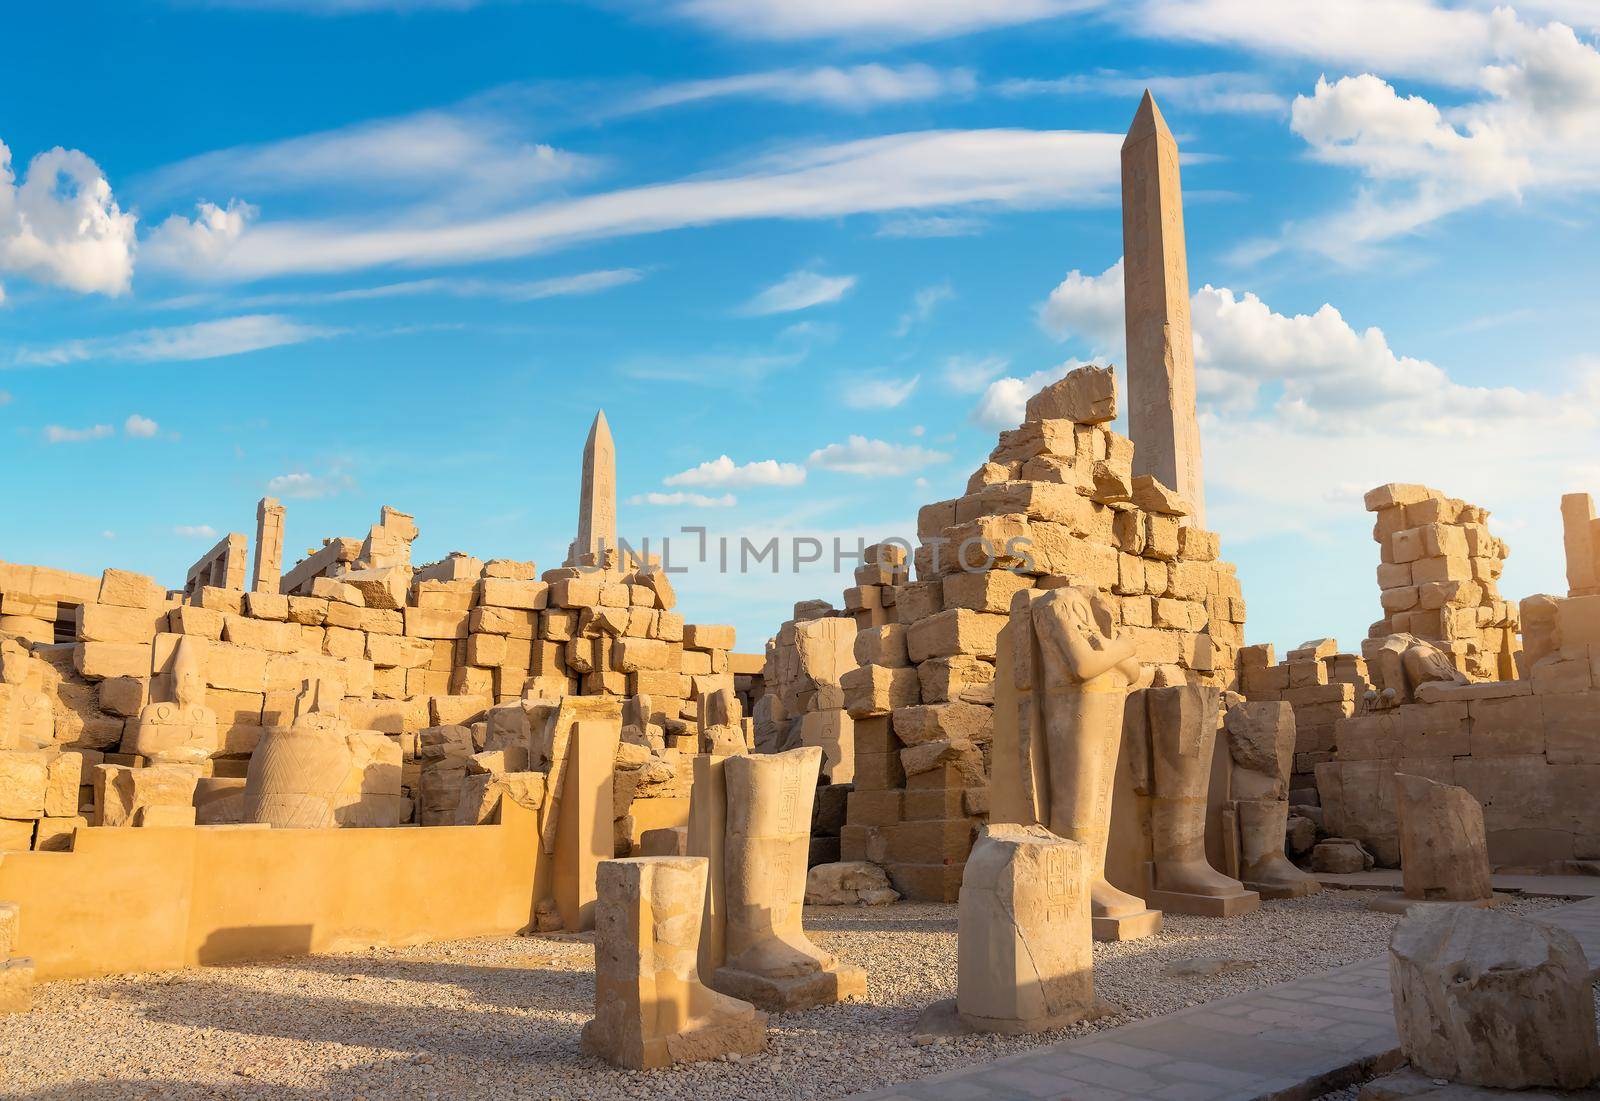 Ruins and obelisks of the ancient temple in Luxor